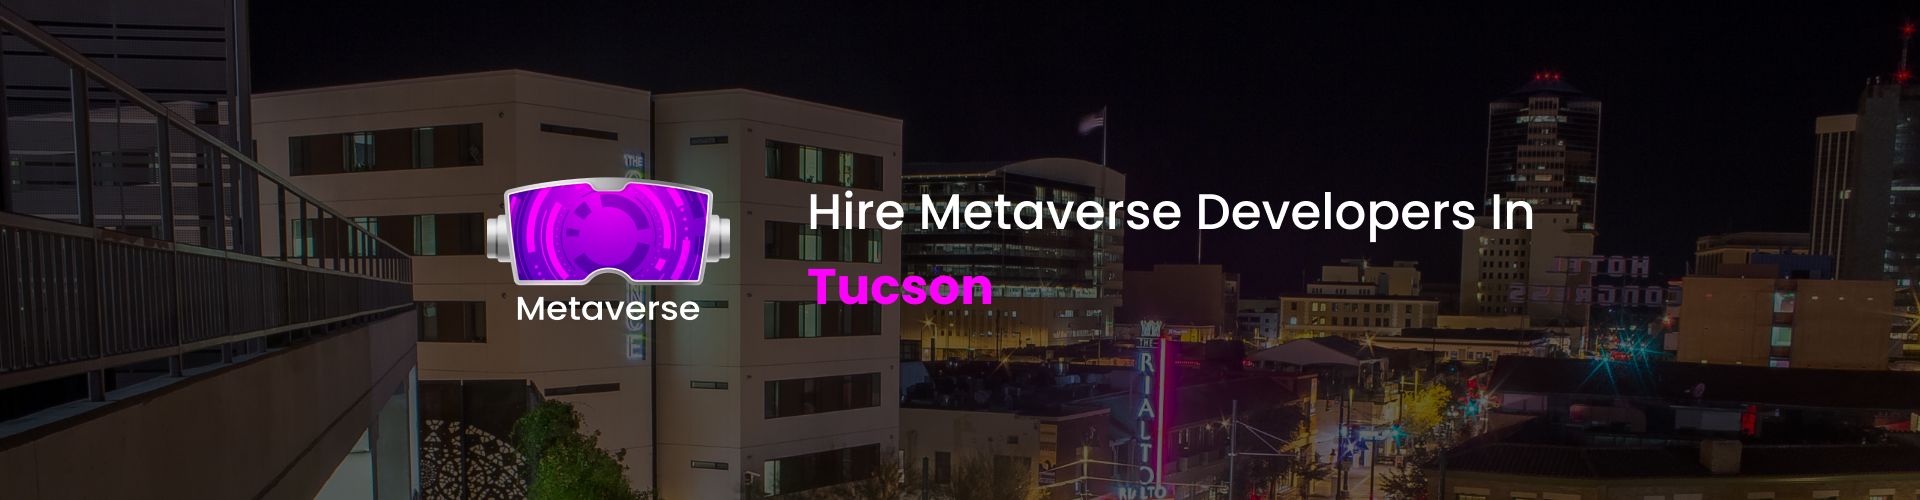 hire metaverse developers in tucson